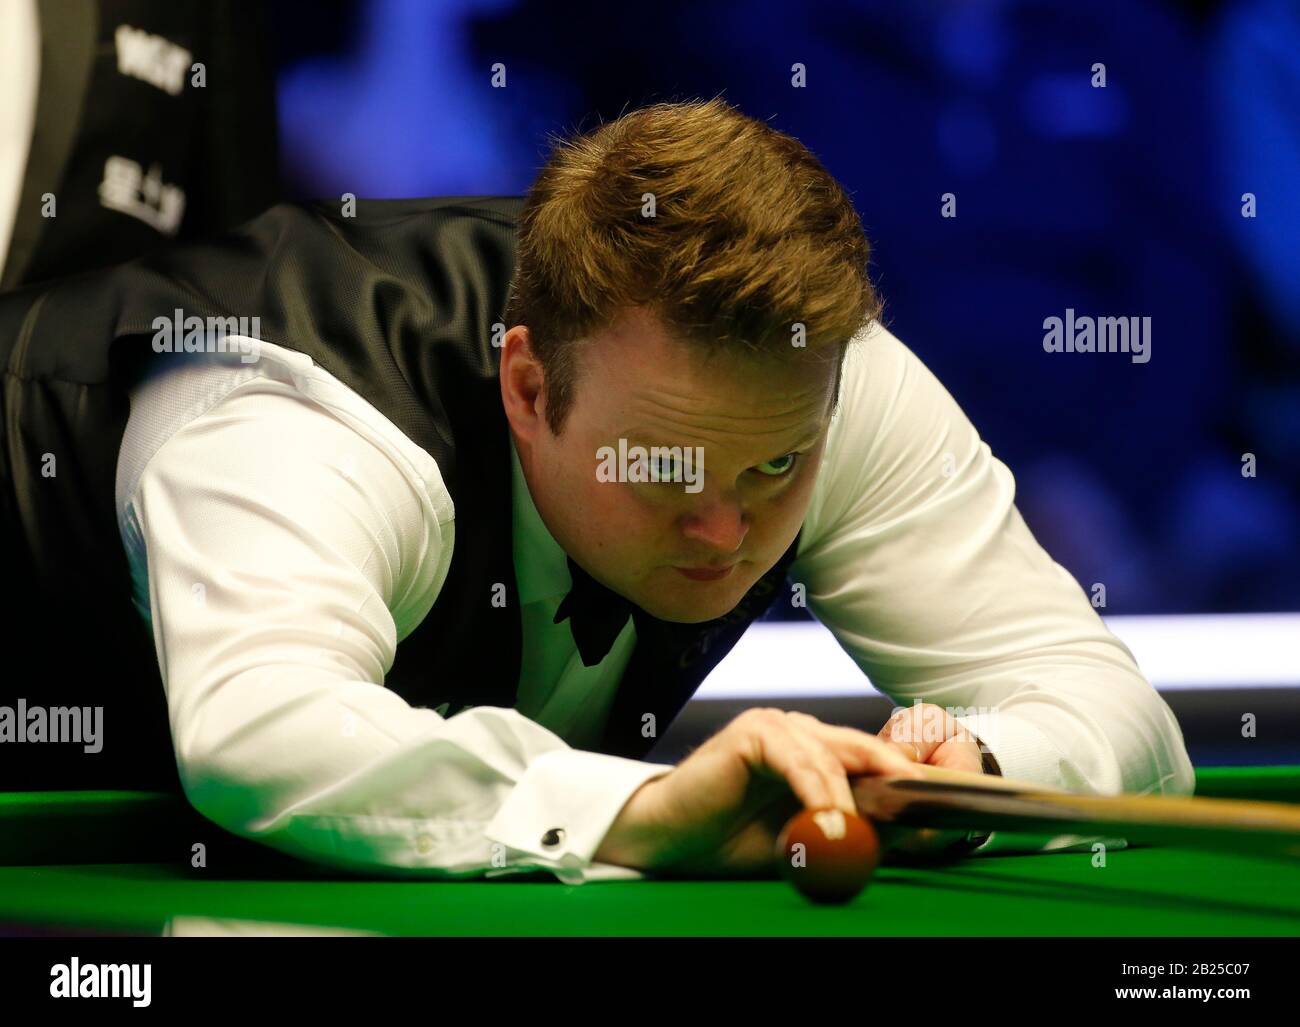 Shaun Murphy at the table during match against Si Jiahui during day six of the Cazoo World Snooker Championship at the Crucible Theatre, Sheffield